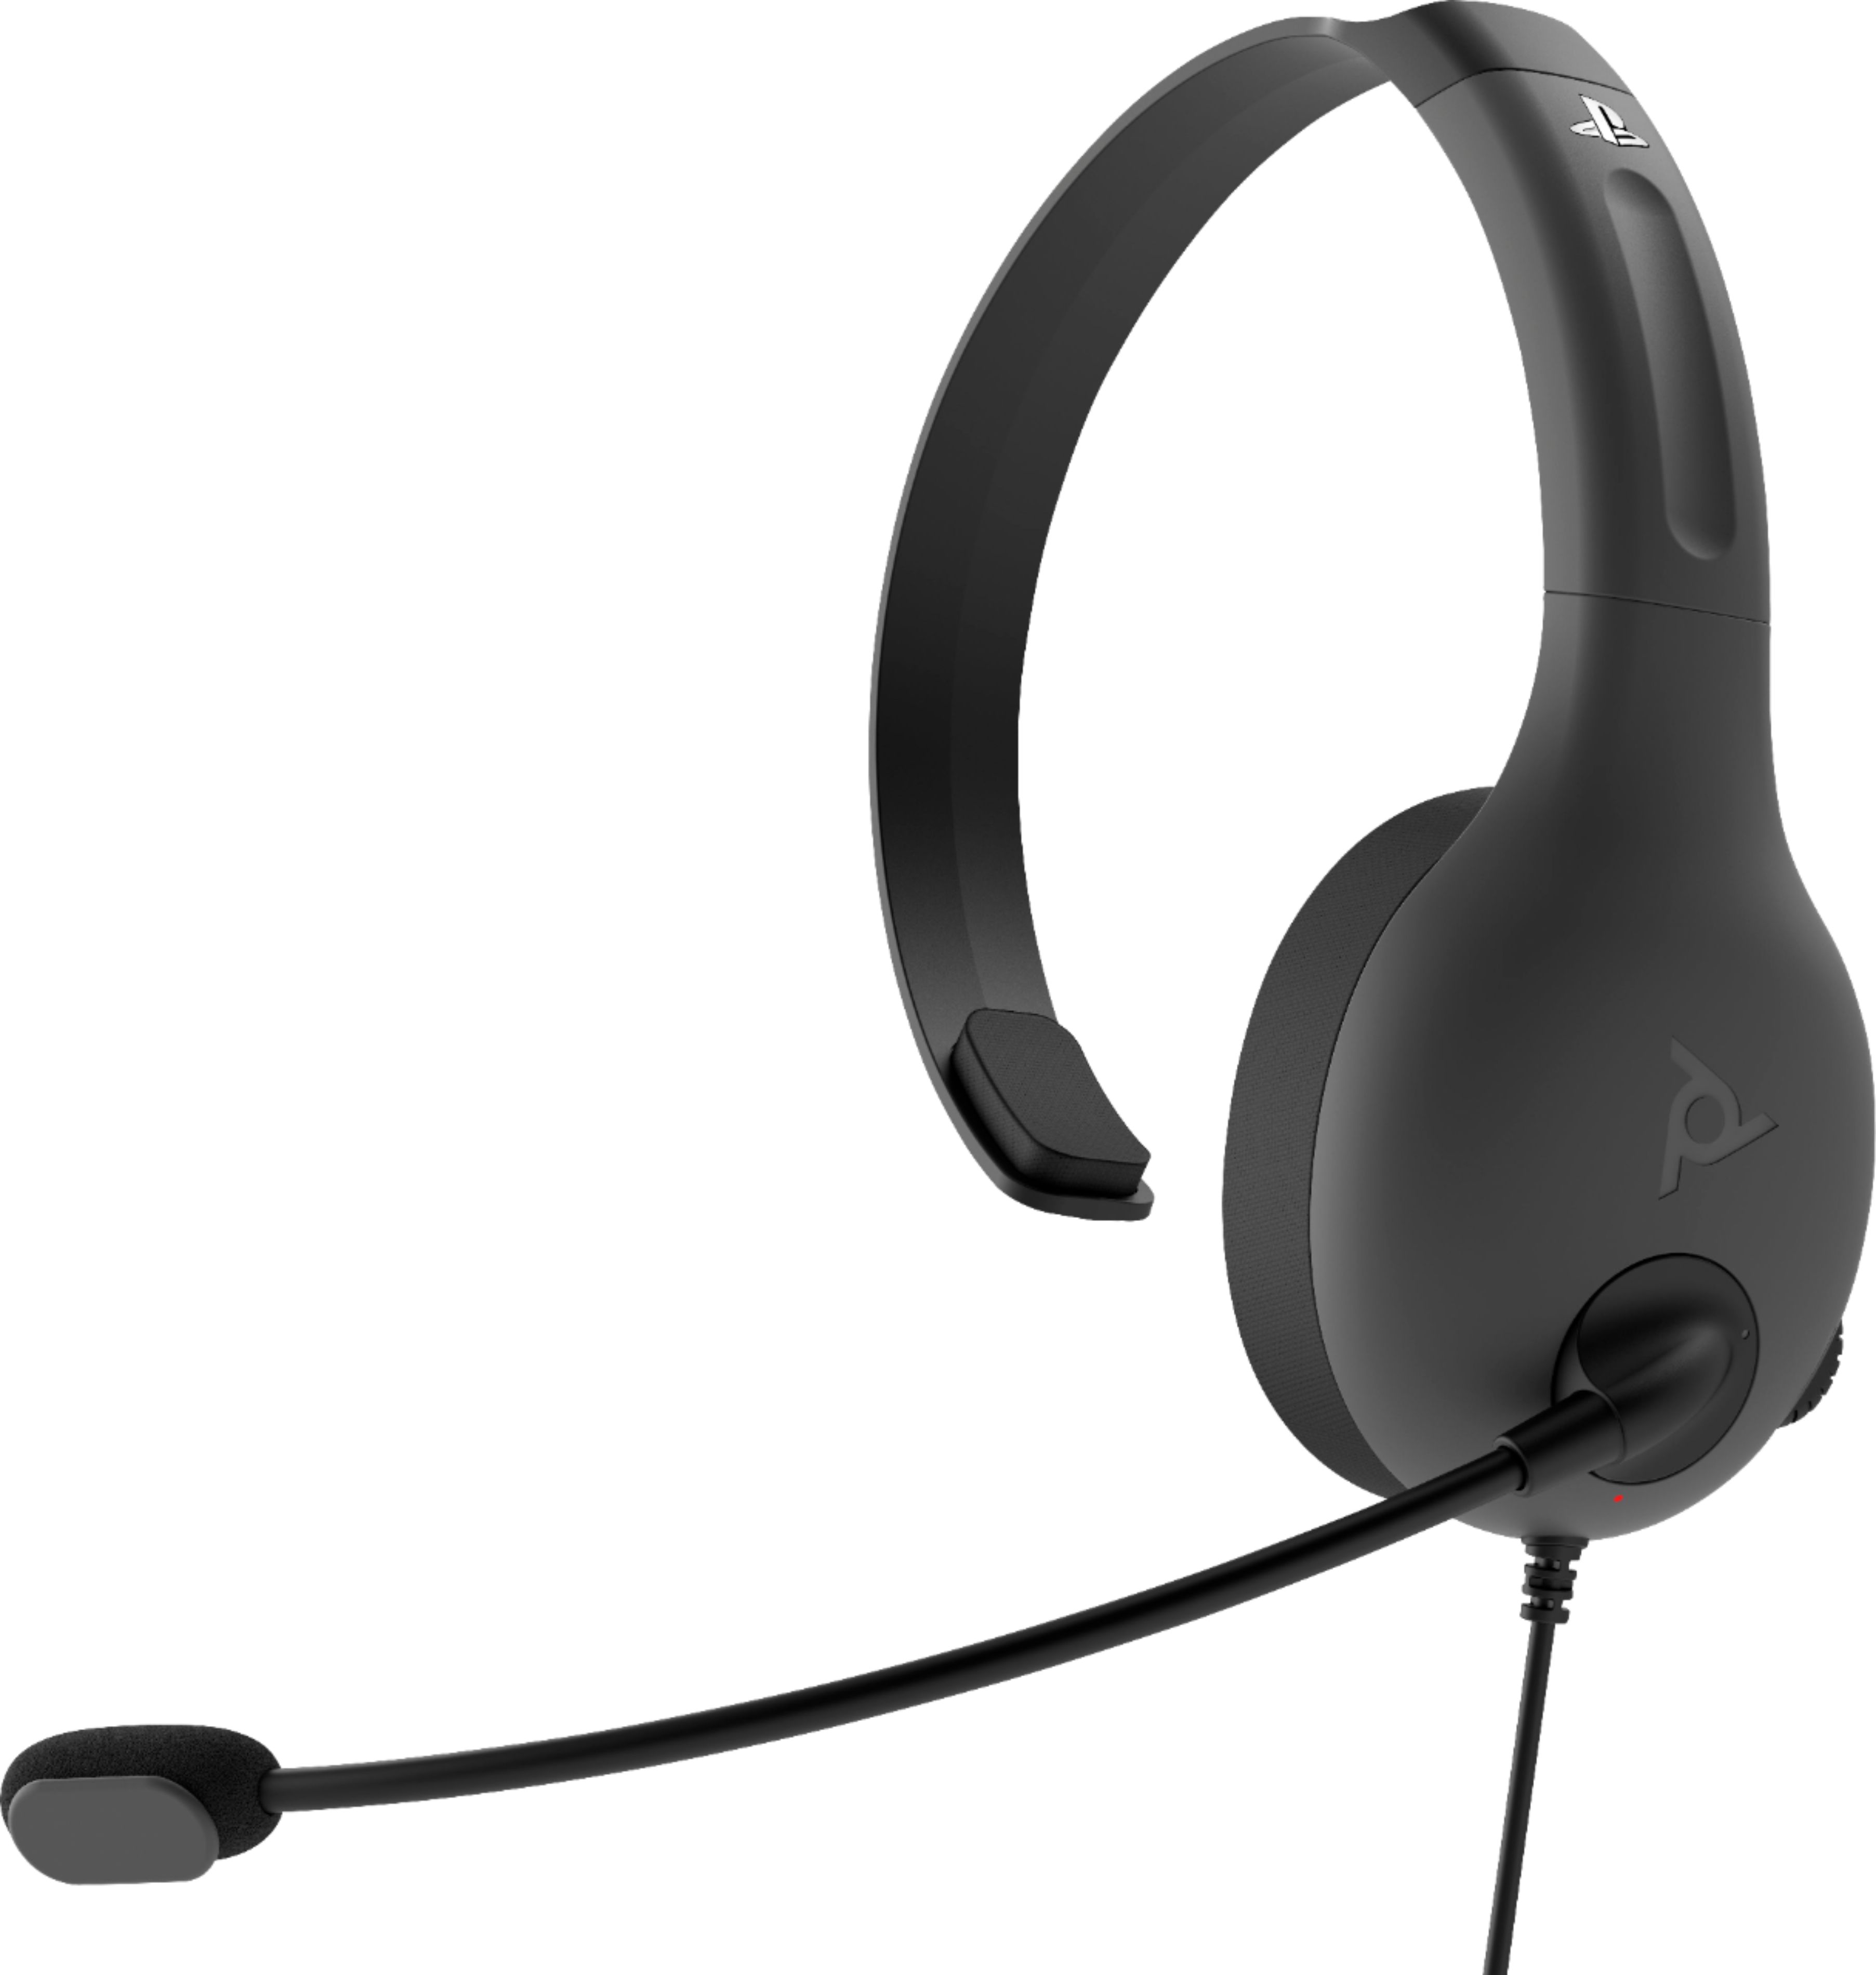 schetsen spanning Ik heb een contract gemaakt PDP LVL30 Wired Mono Gaming Headset for PlayStation 4 Gray 051-107-NA -  Best Buy